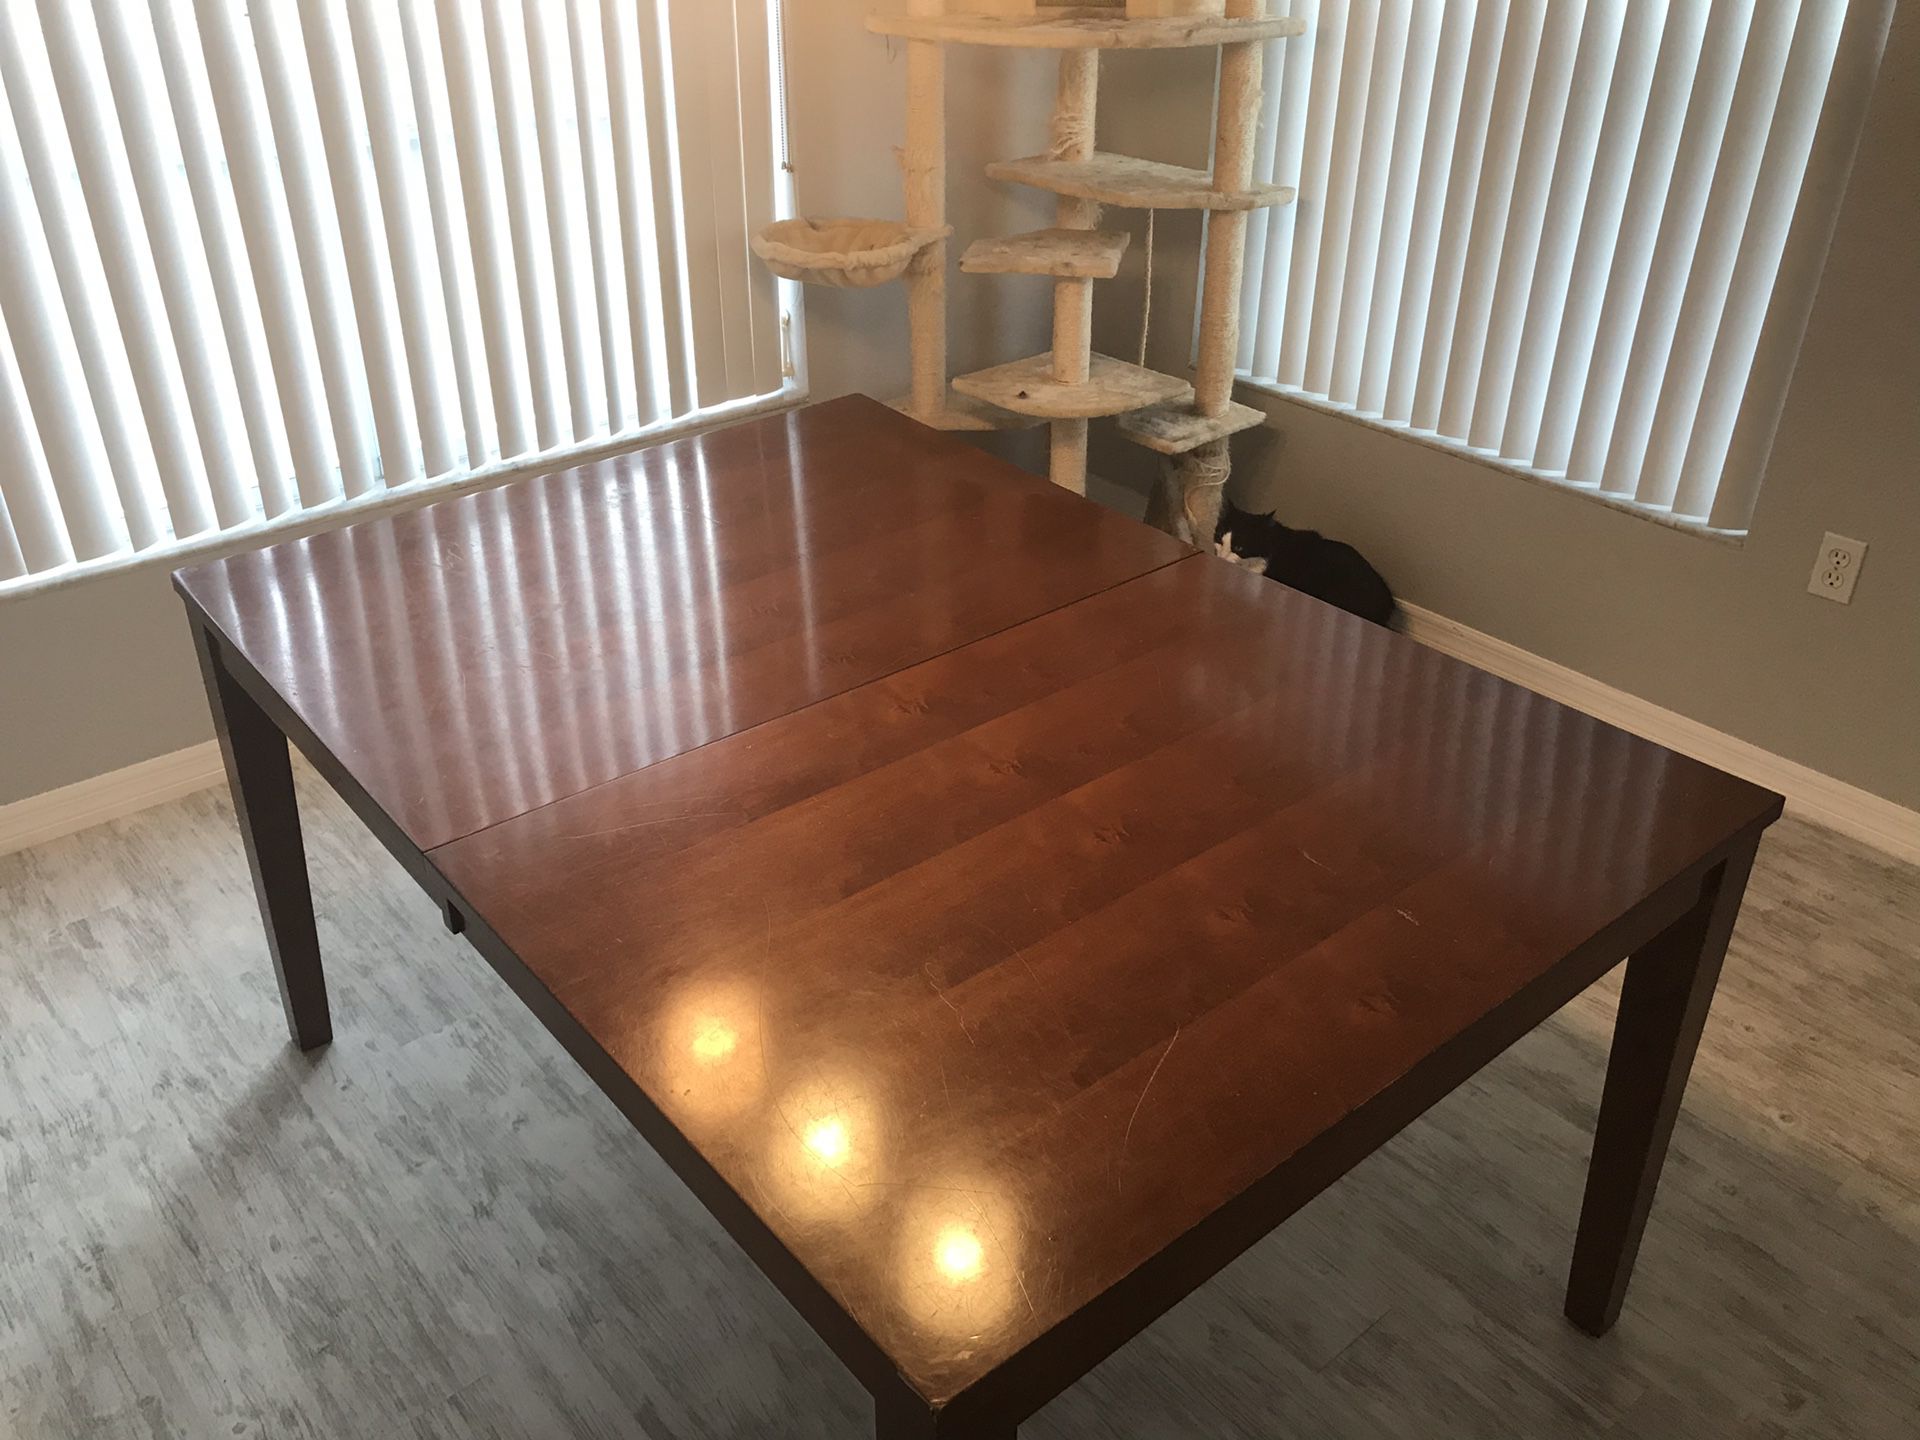 Dinning Room Table (No chairs)